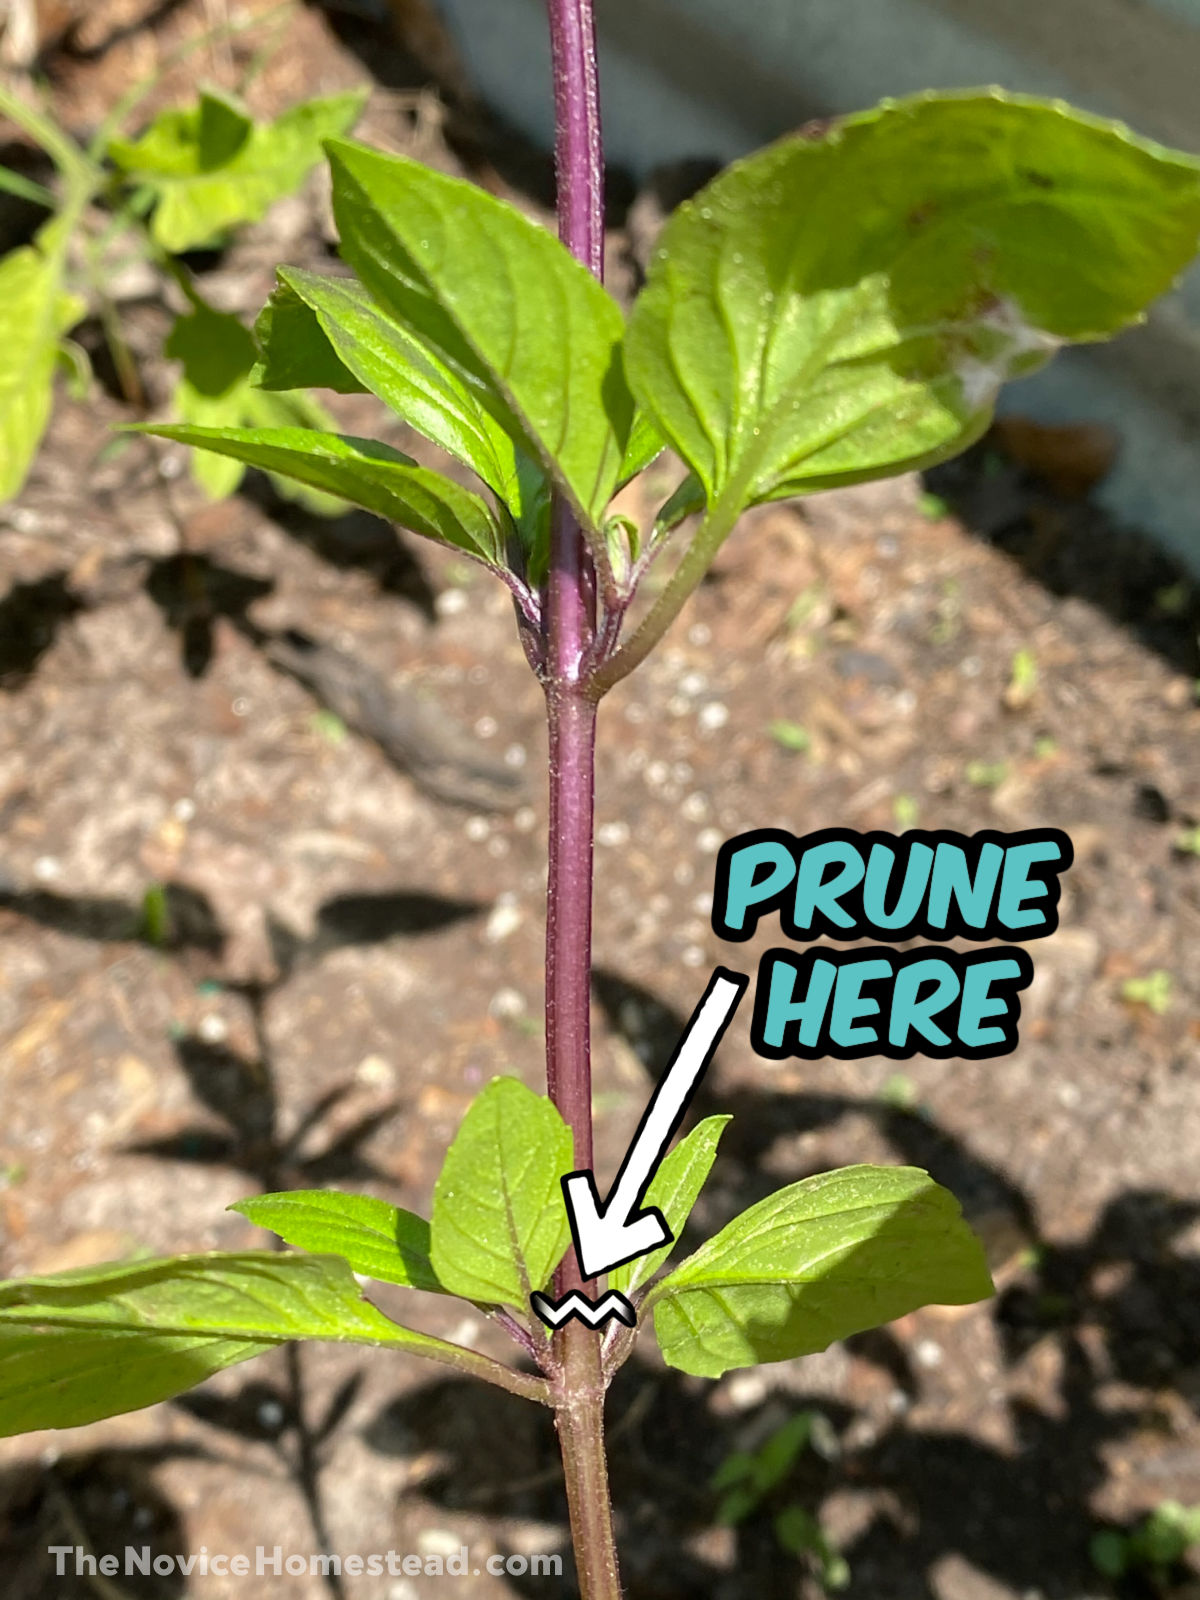 basil plant with illustration showing how to prune above the node